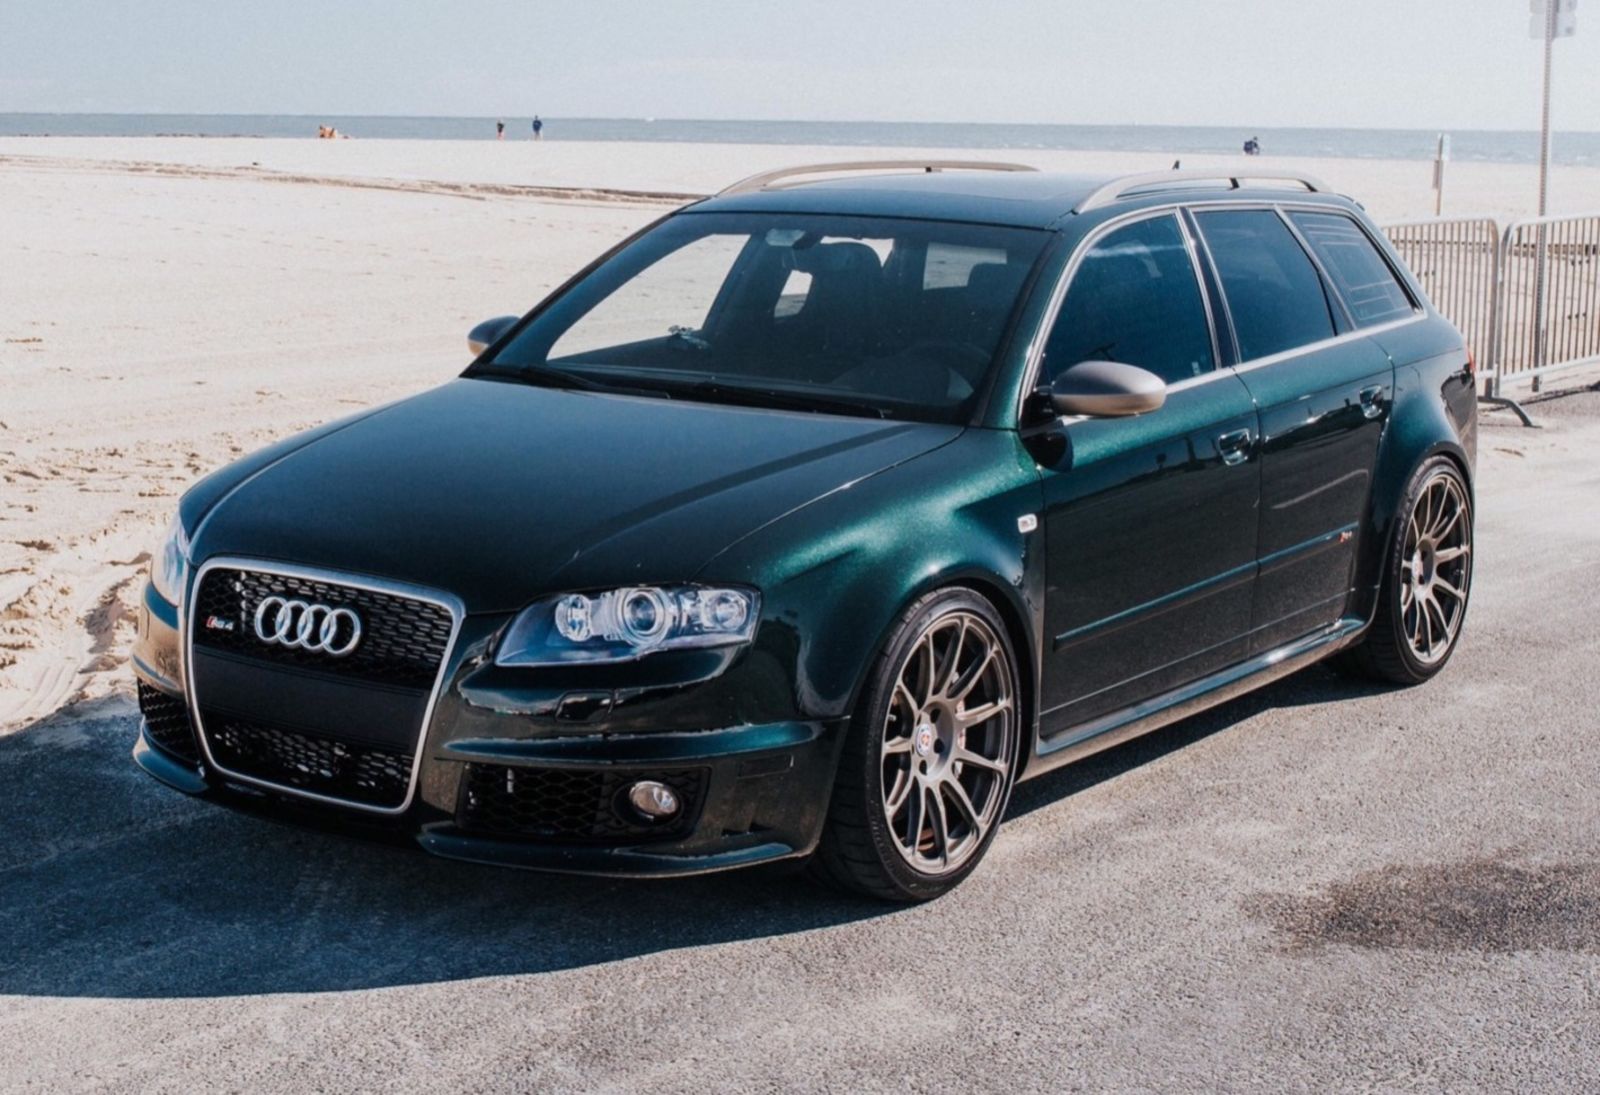 Illustration for article titled I dont normally lust after Audis, but this one is the exception to the rule